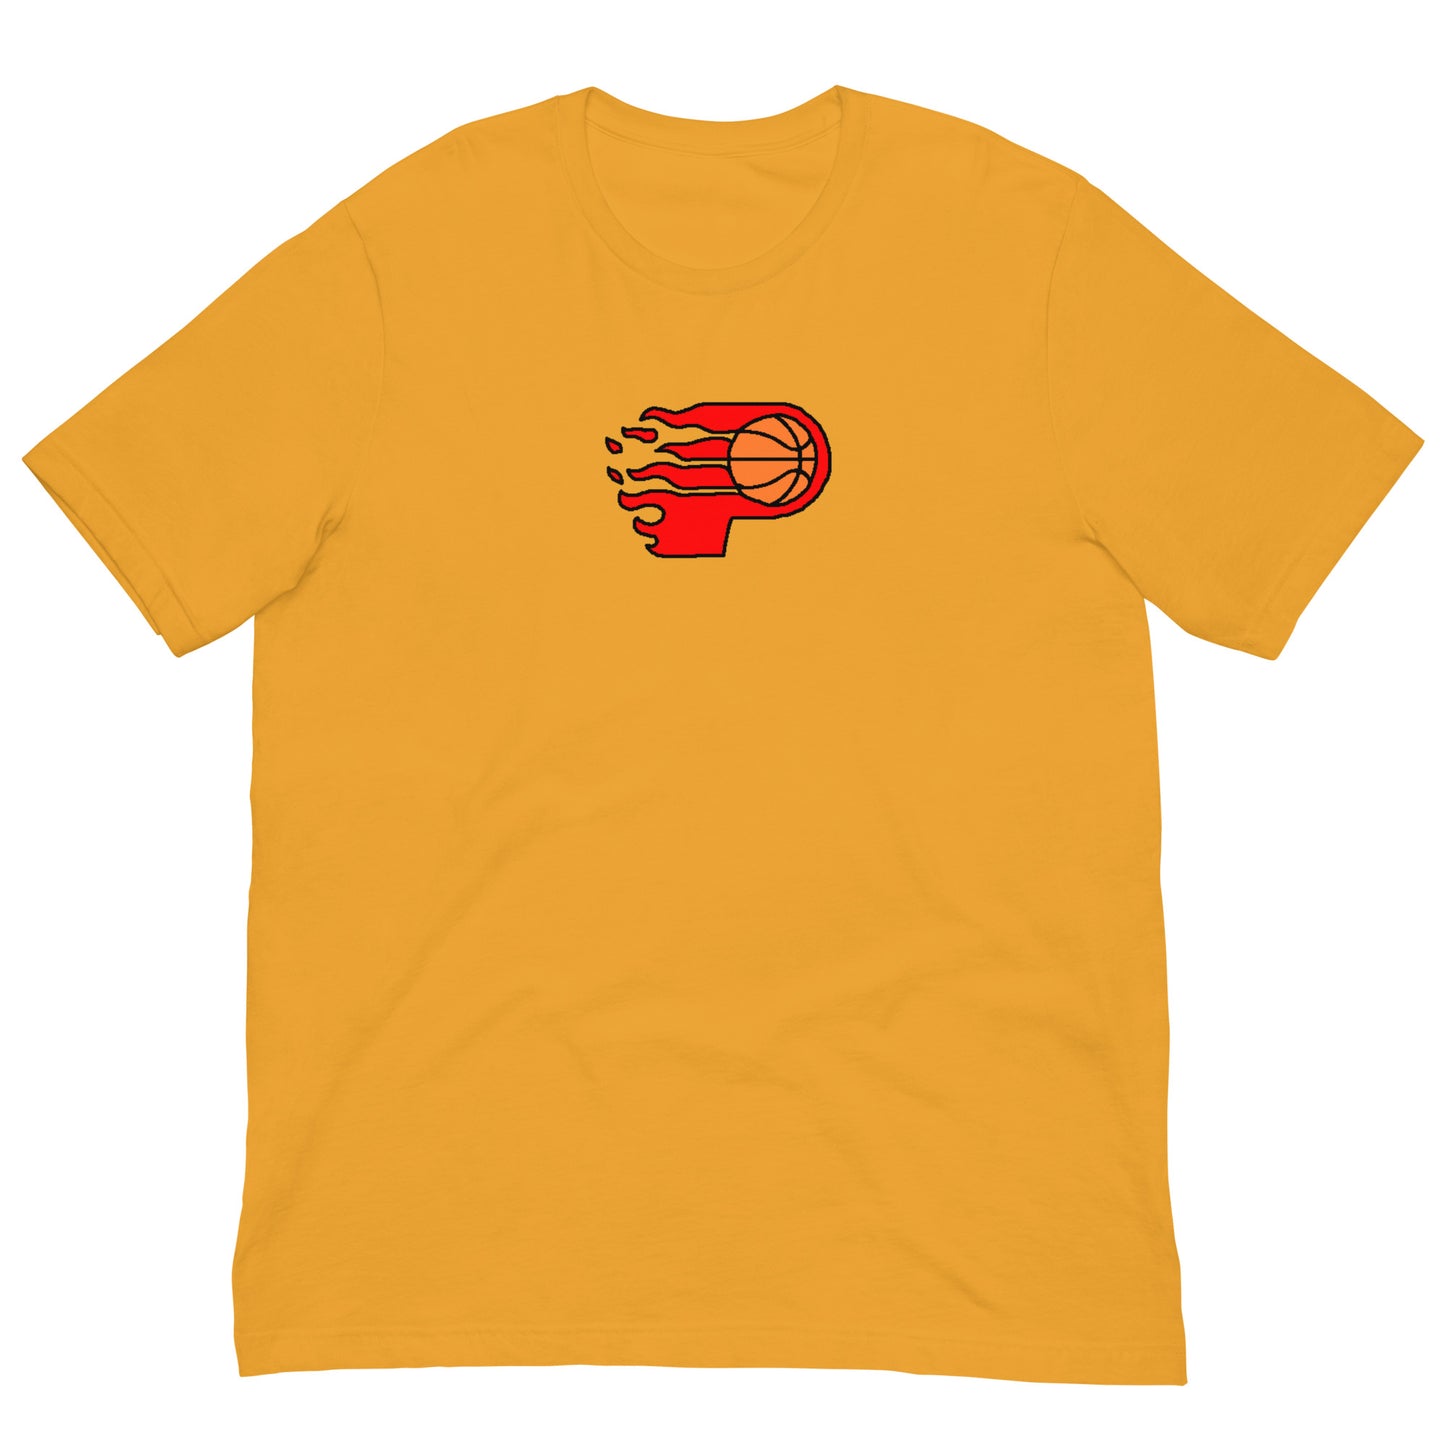 The Spicy P Shirt